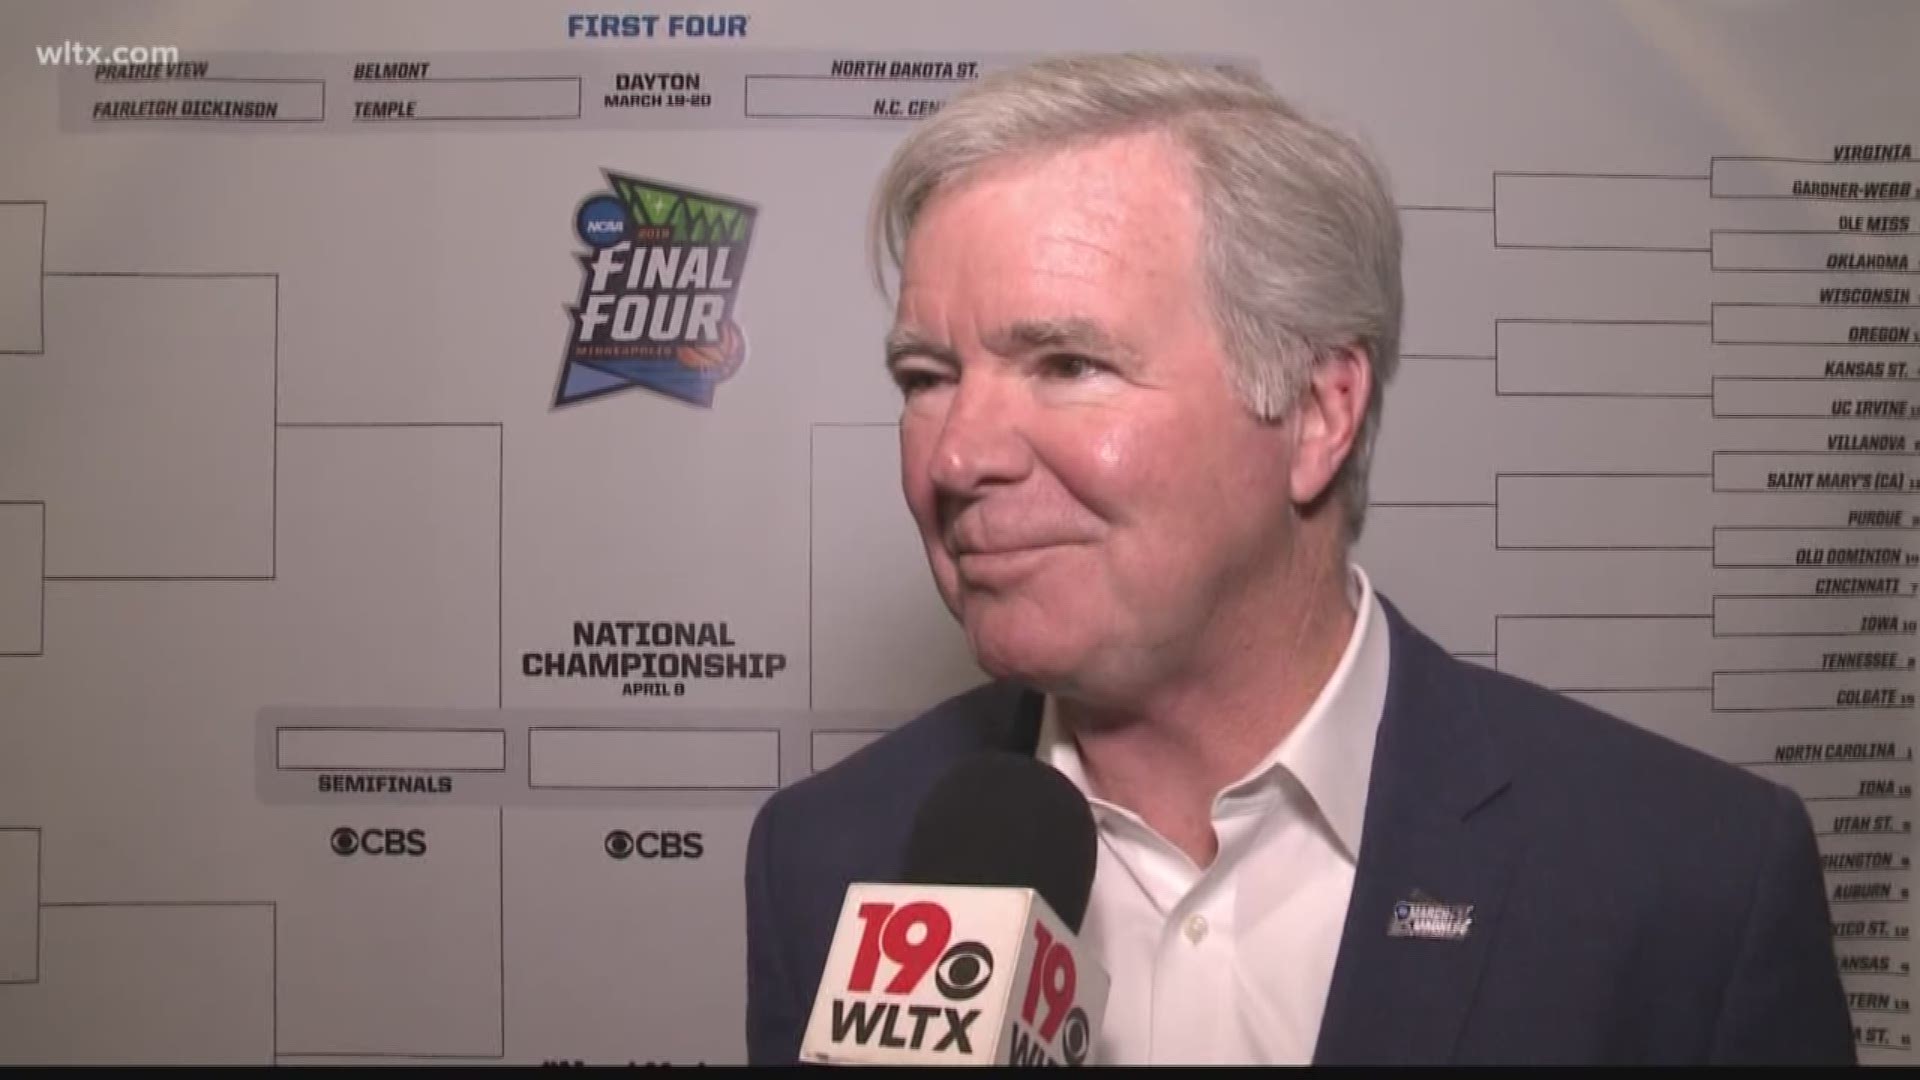 Mark Emmert has high praise for the way Columbia has hosted its first NCAA men's tournament in nearly 50 years.